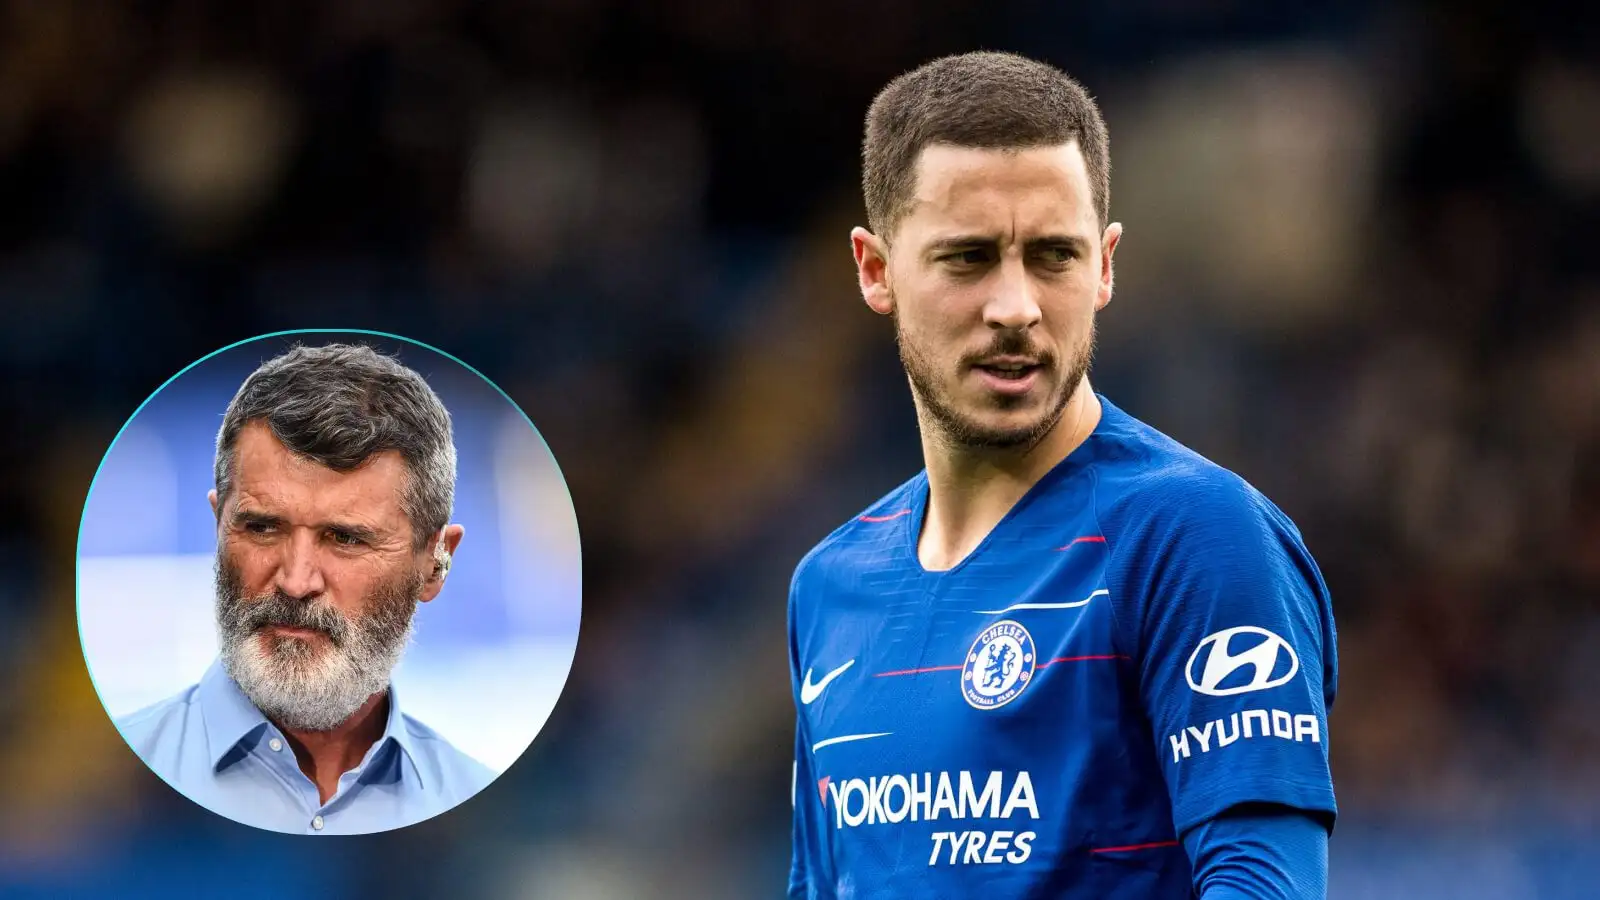 Keane insists ‘brilliant’ Chelsea legend not in same ‘bracket’ as Henry, Shearer amid ‘overweight’ claim